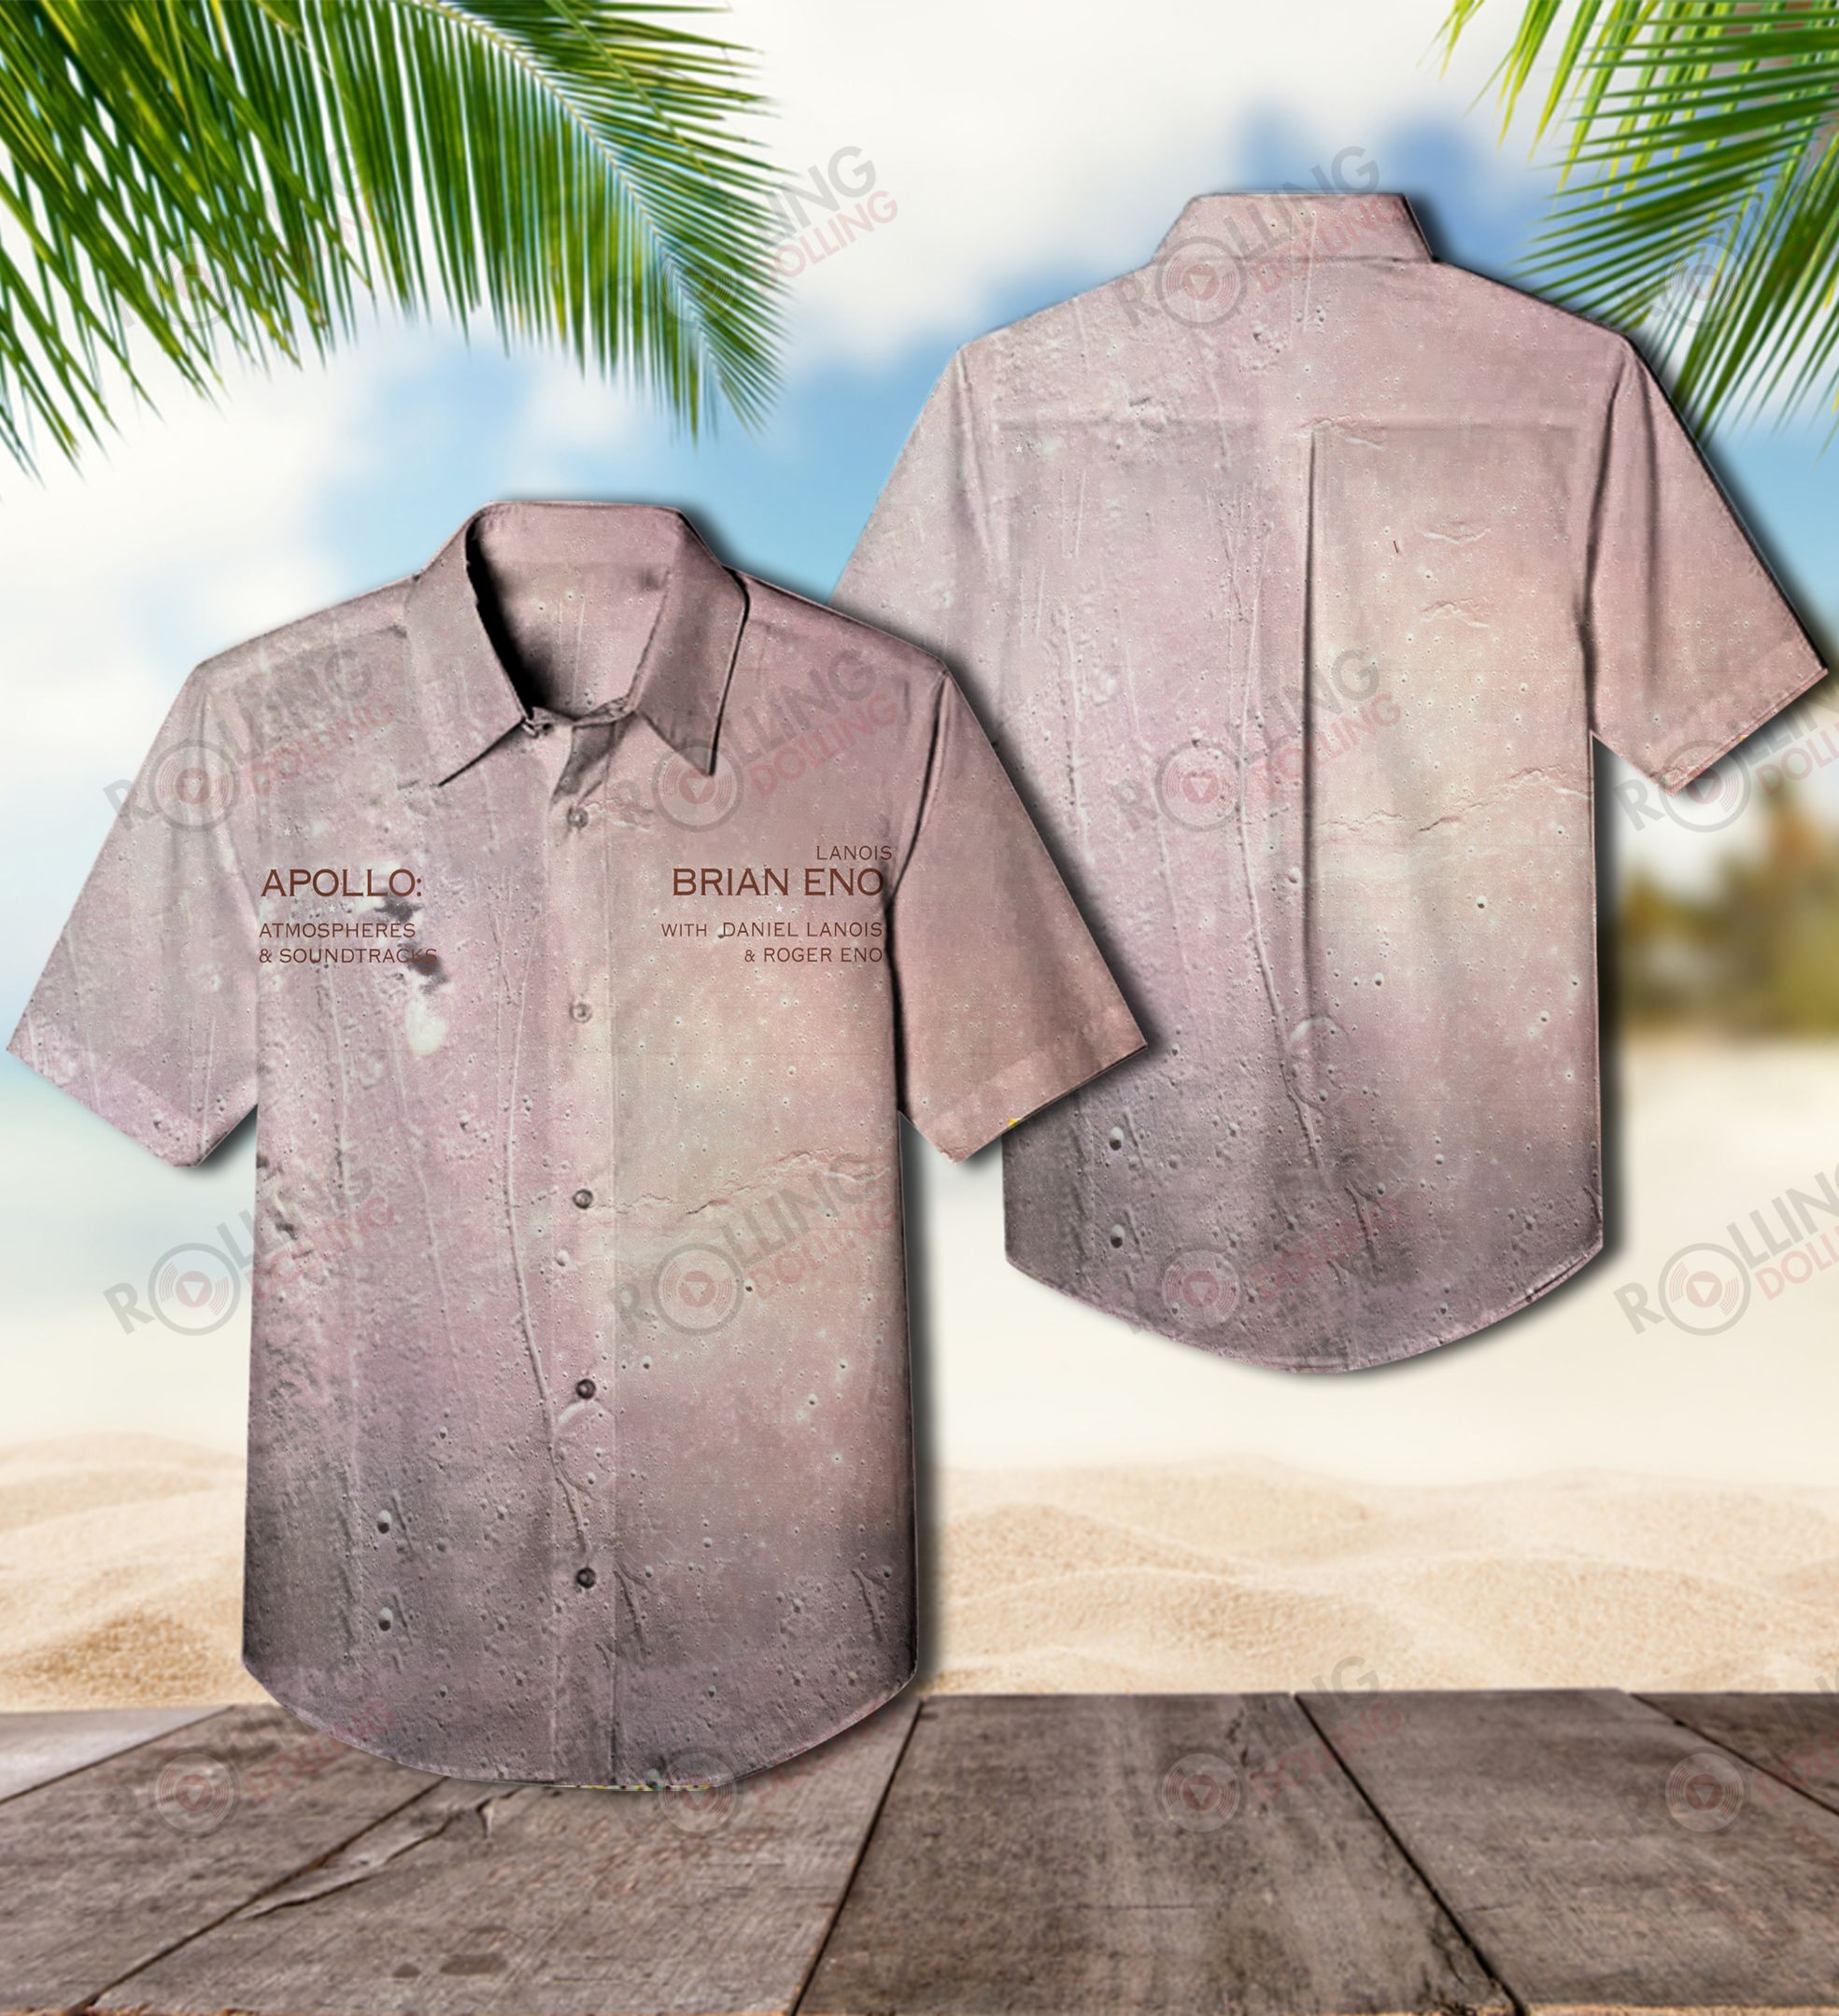 The Hawaiian Shirt is a popular shirt that is worn by Rock band fans 42